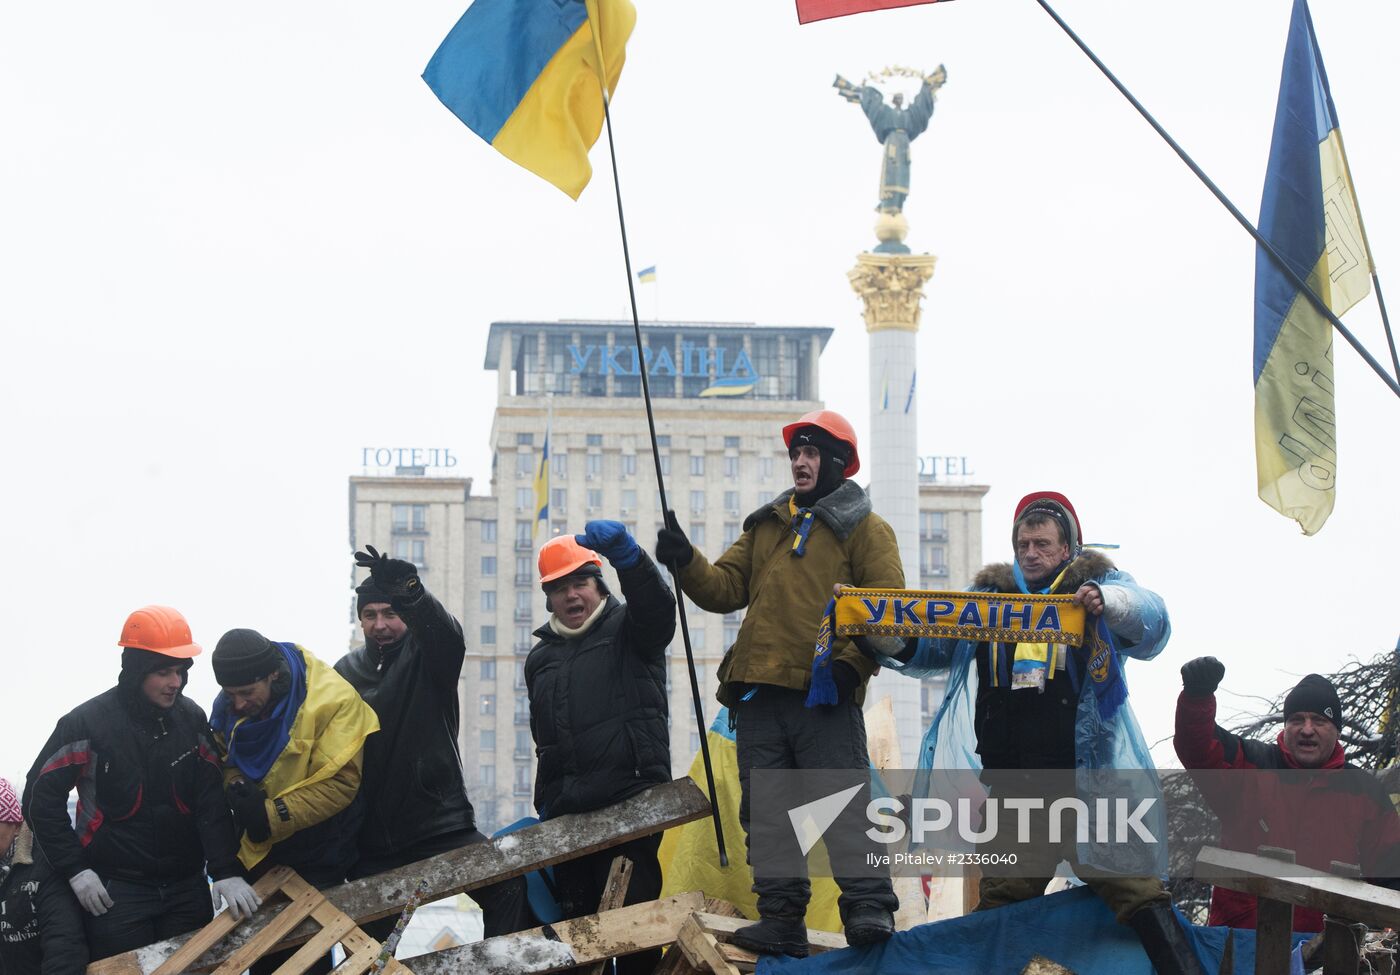 Internal security troops storm protesters' camp on Maidan Square